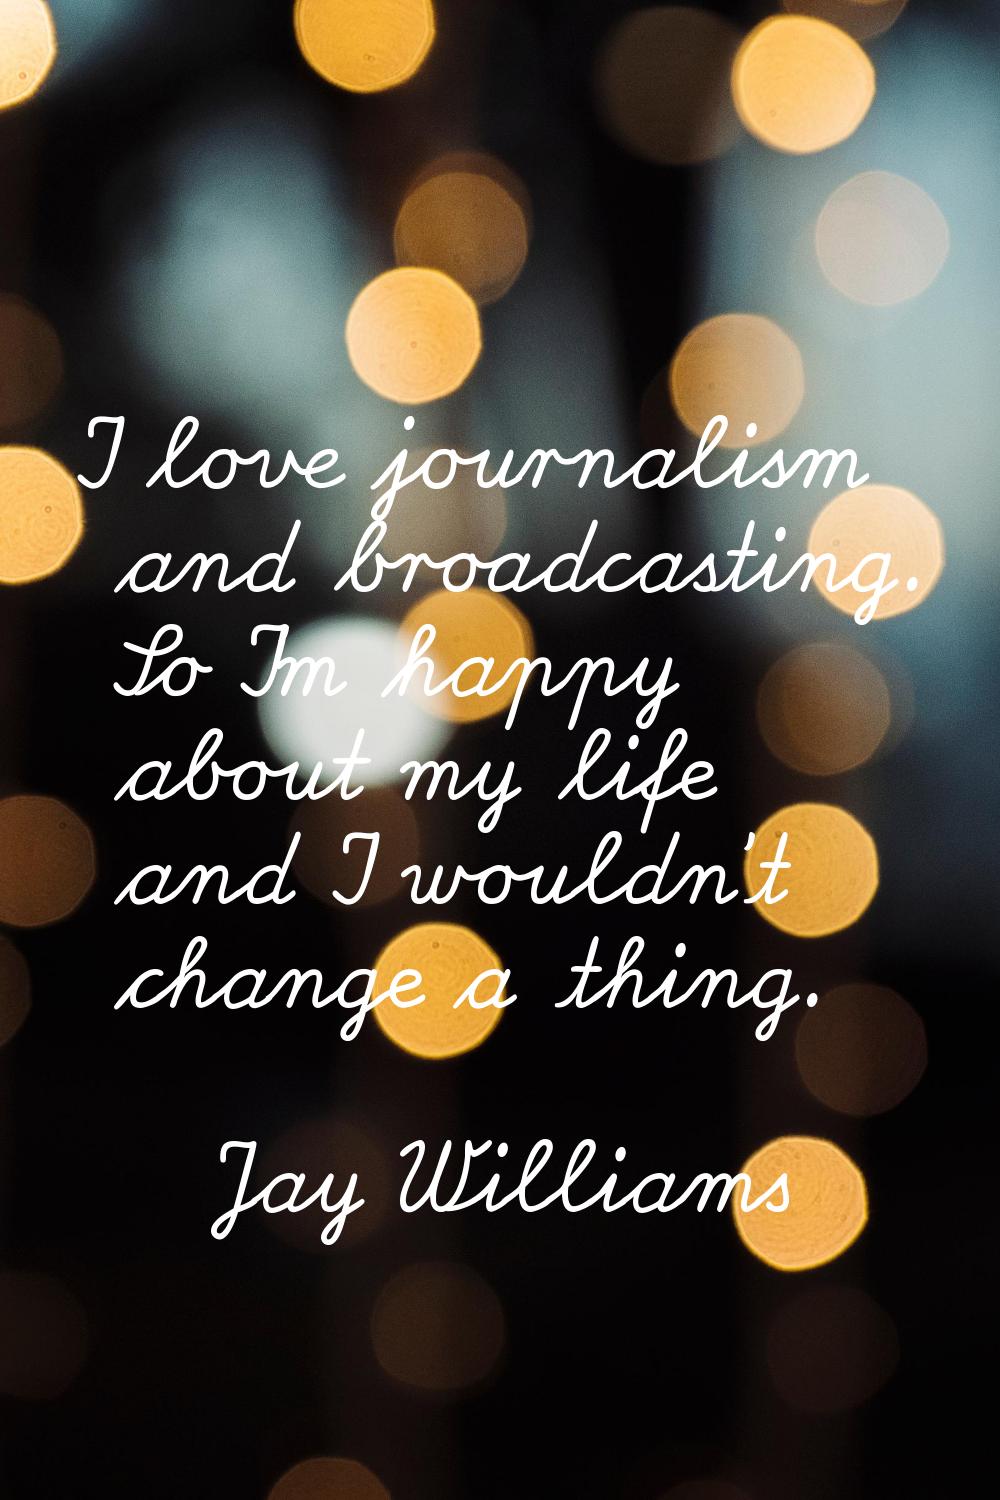 I love journalism and broadcasting. So I'm happy about my life and I wouldn't change a thing.